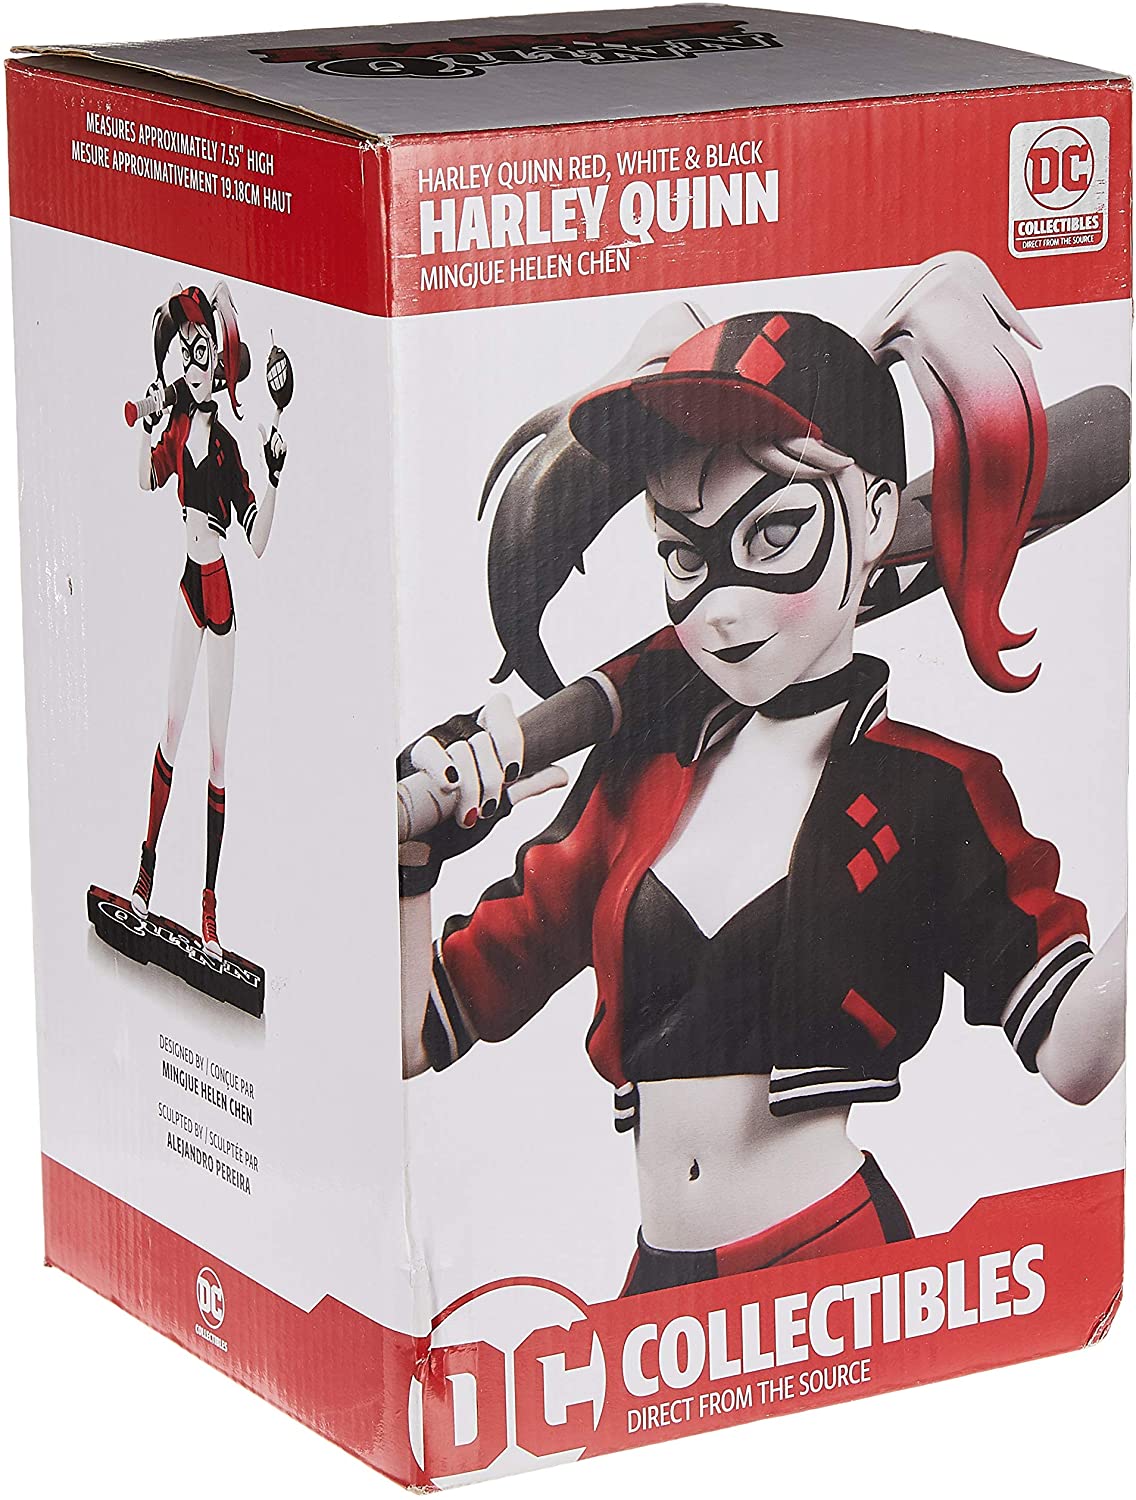 Dc Collectibles Harley Quinn Red, White & Black: Harley Quinn By Mingjue Helen Chen Resin Statue - Statue - The Hooded Goblin